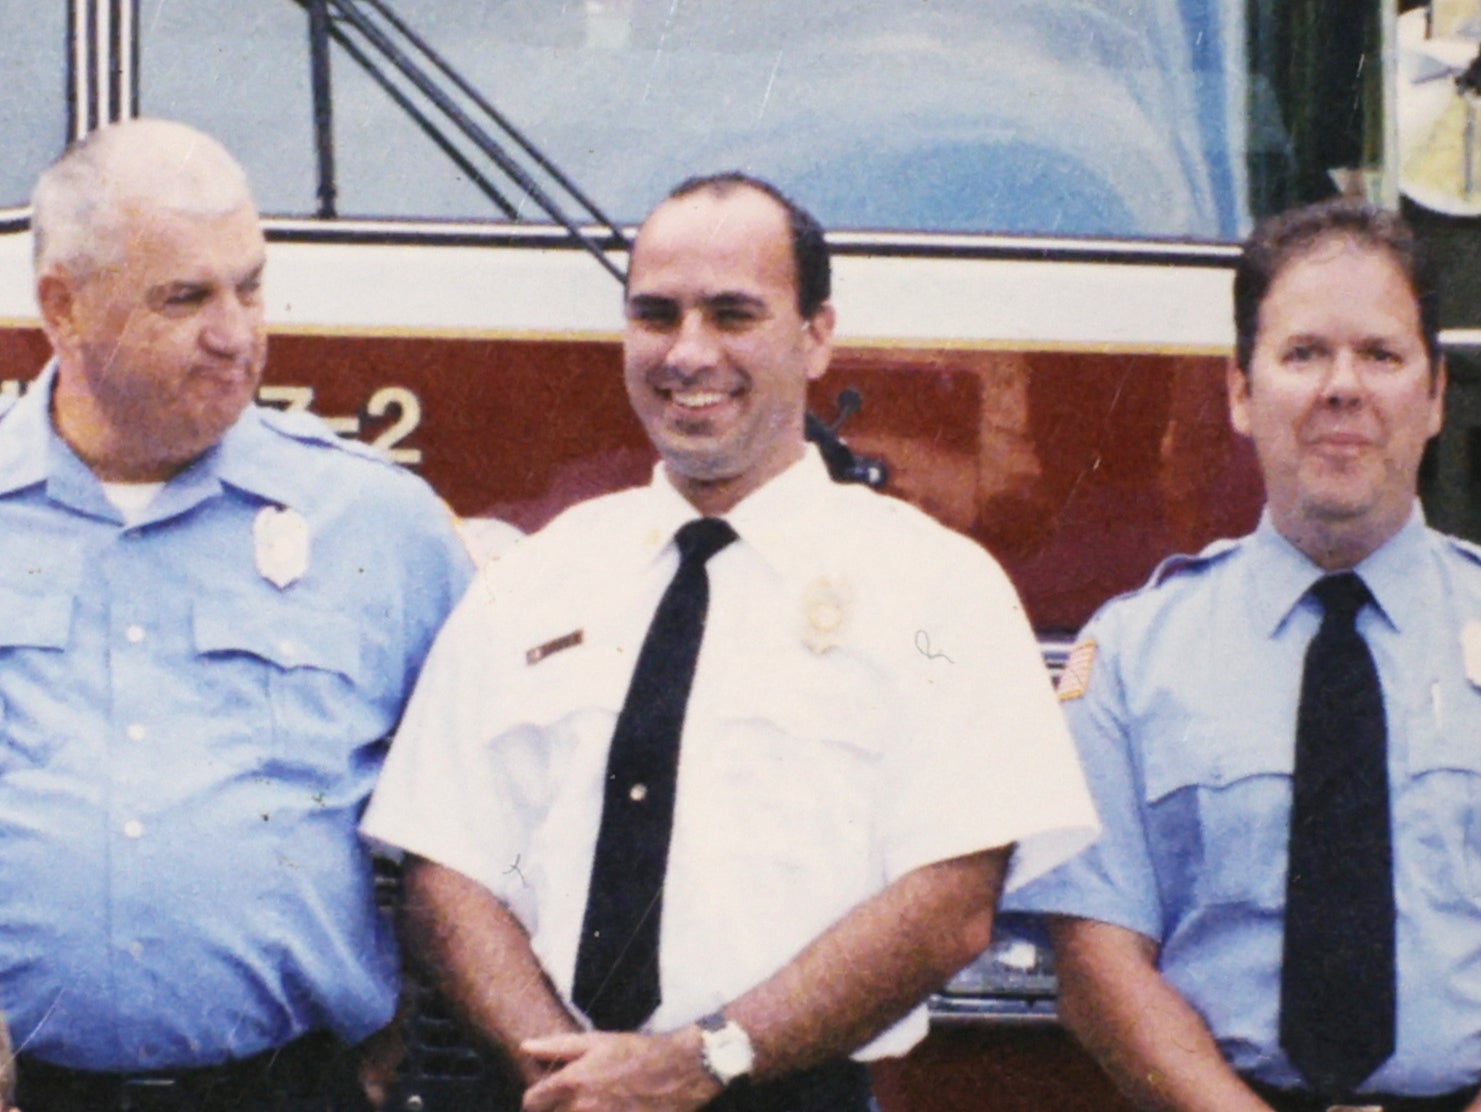 Corey Comperatore, center, was a former volunteer chief firefighter in Buffalo Township, Pennsylvania. In July 2024 he was shot dead when a gunman opened fire on Donald Trump at a rally. His widow hs now revealed his final words